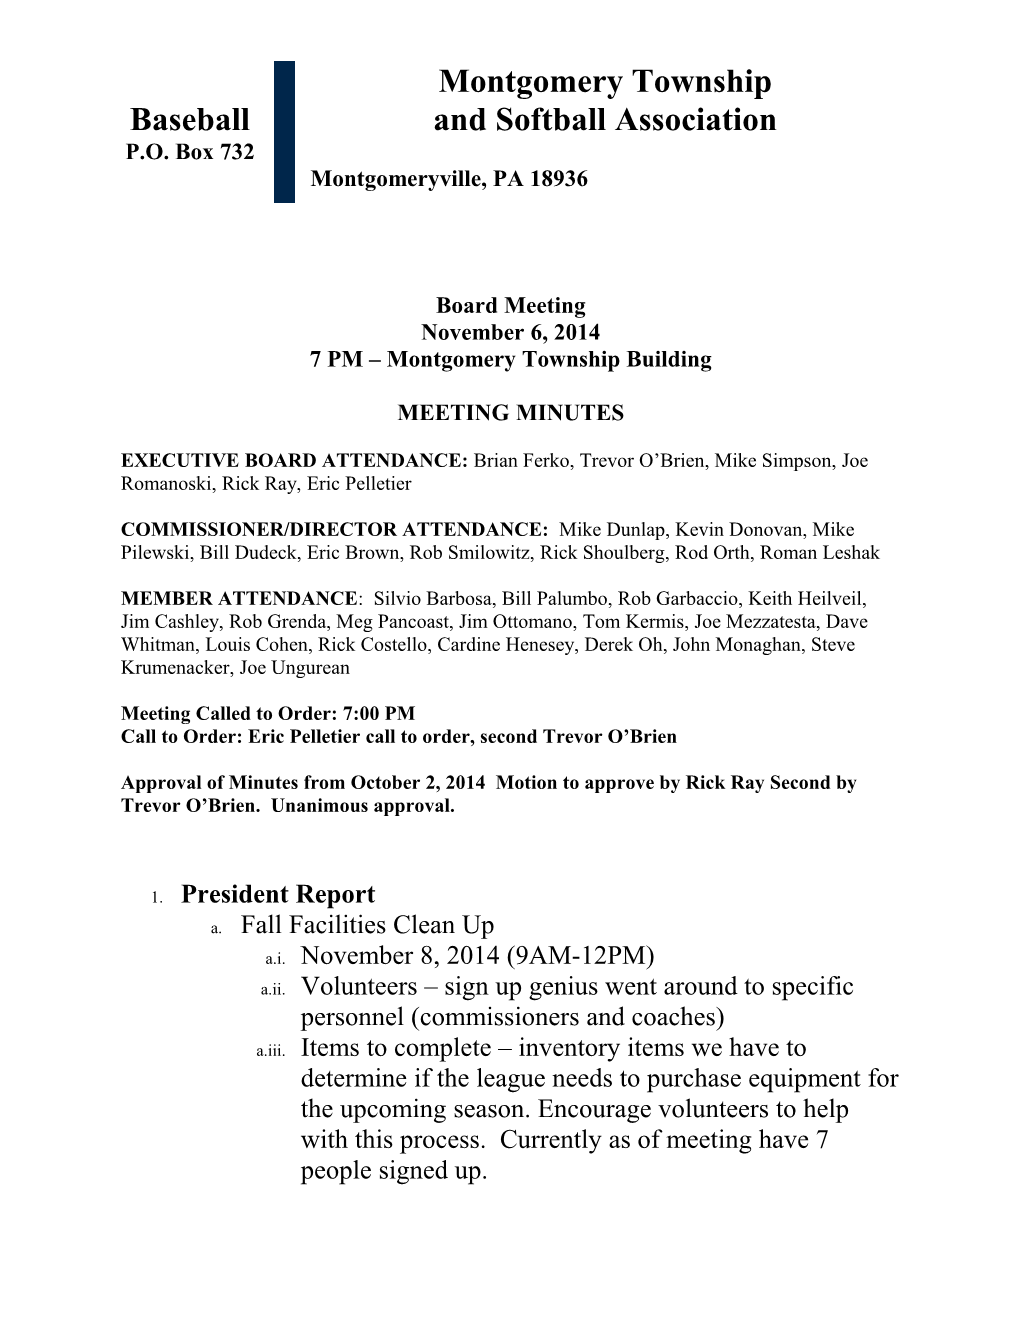 Monthly Board Meeting Minutes 11/6/2014